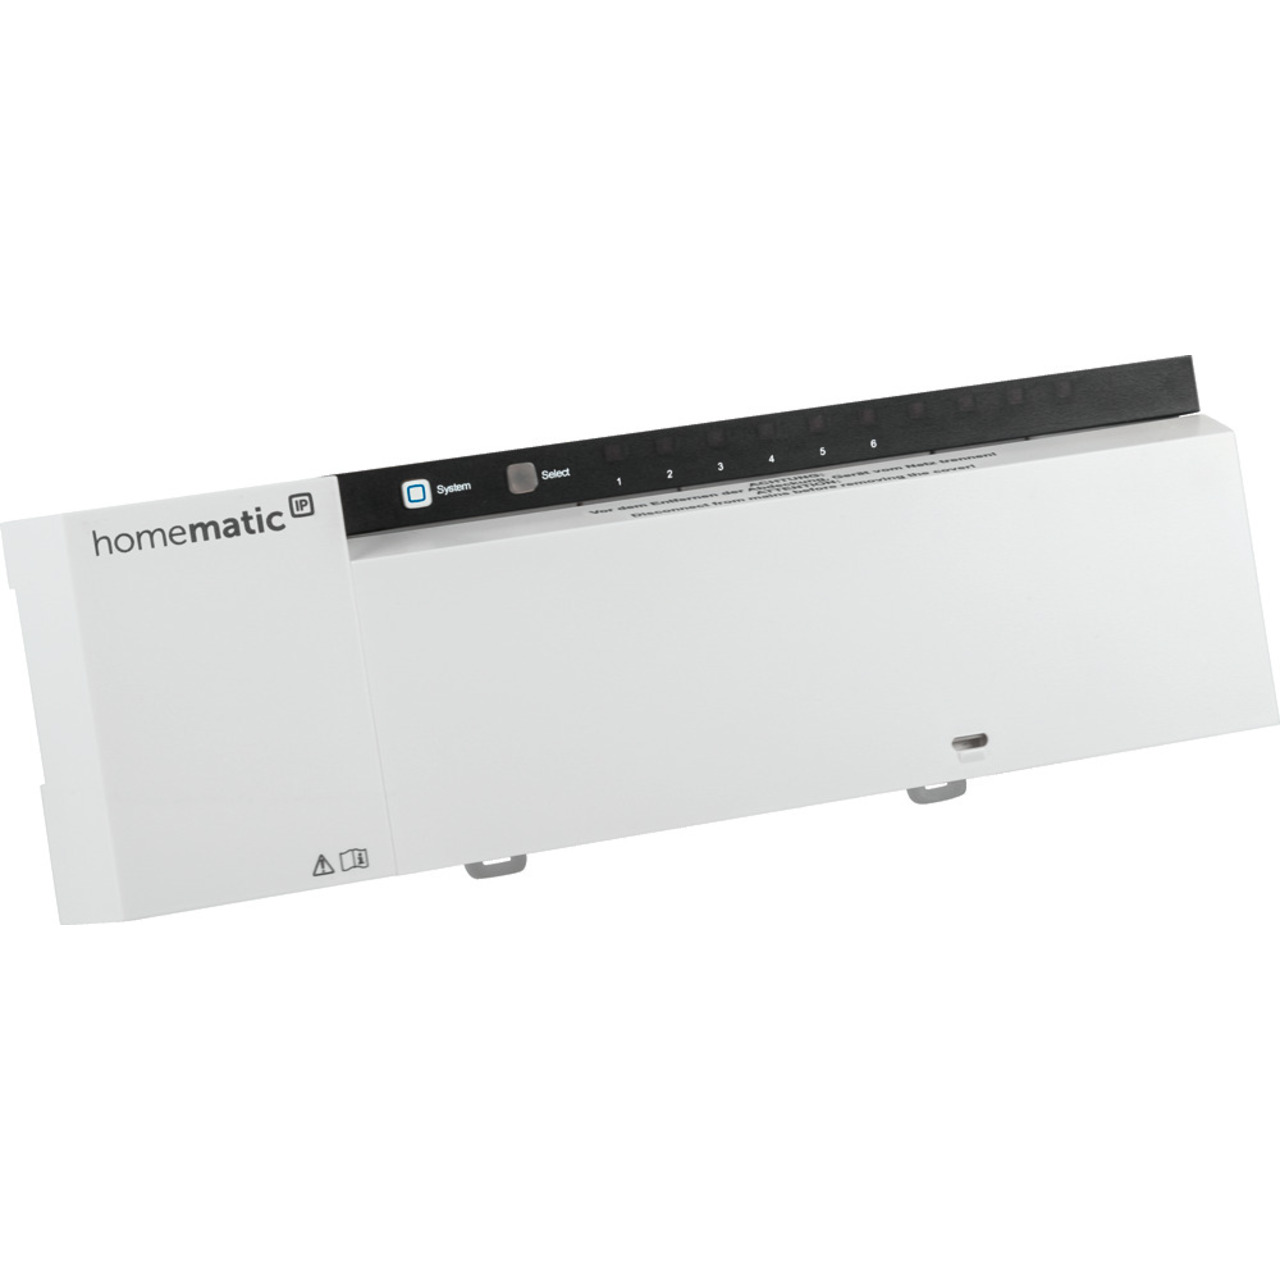 Homematic IP Wired Smart Home Fussbodenheizungscontroller HmIPW-FAL230-C6  6-fach- 230 V unter Hausautomation